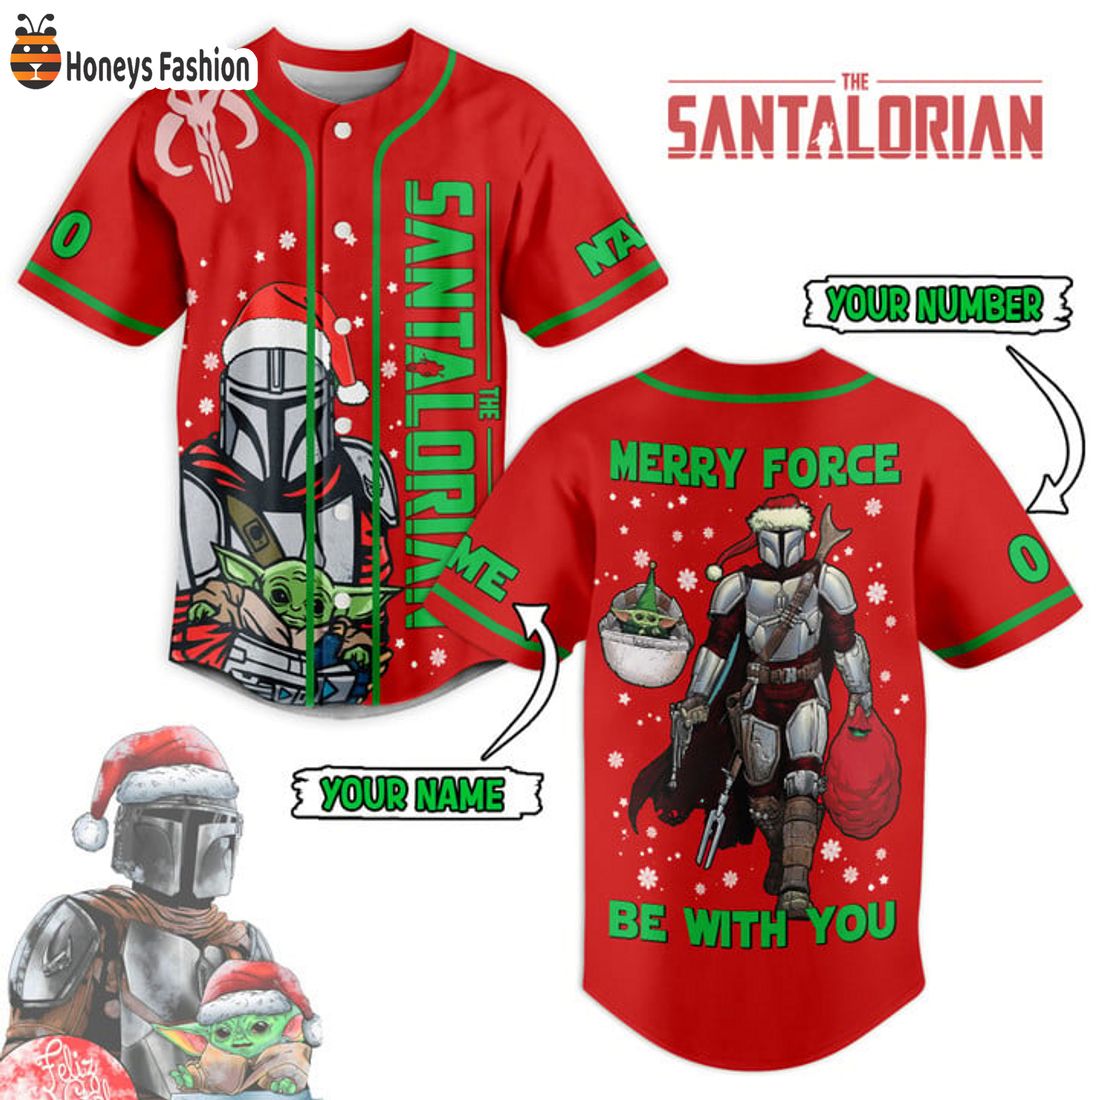 SELLER Star Wars The Santalorian Merry Force Be With You Personalized Name Number Baseball Jersey